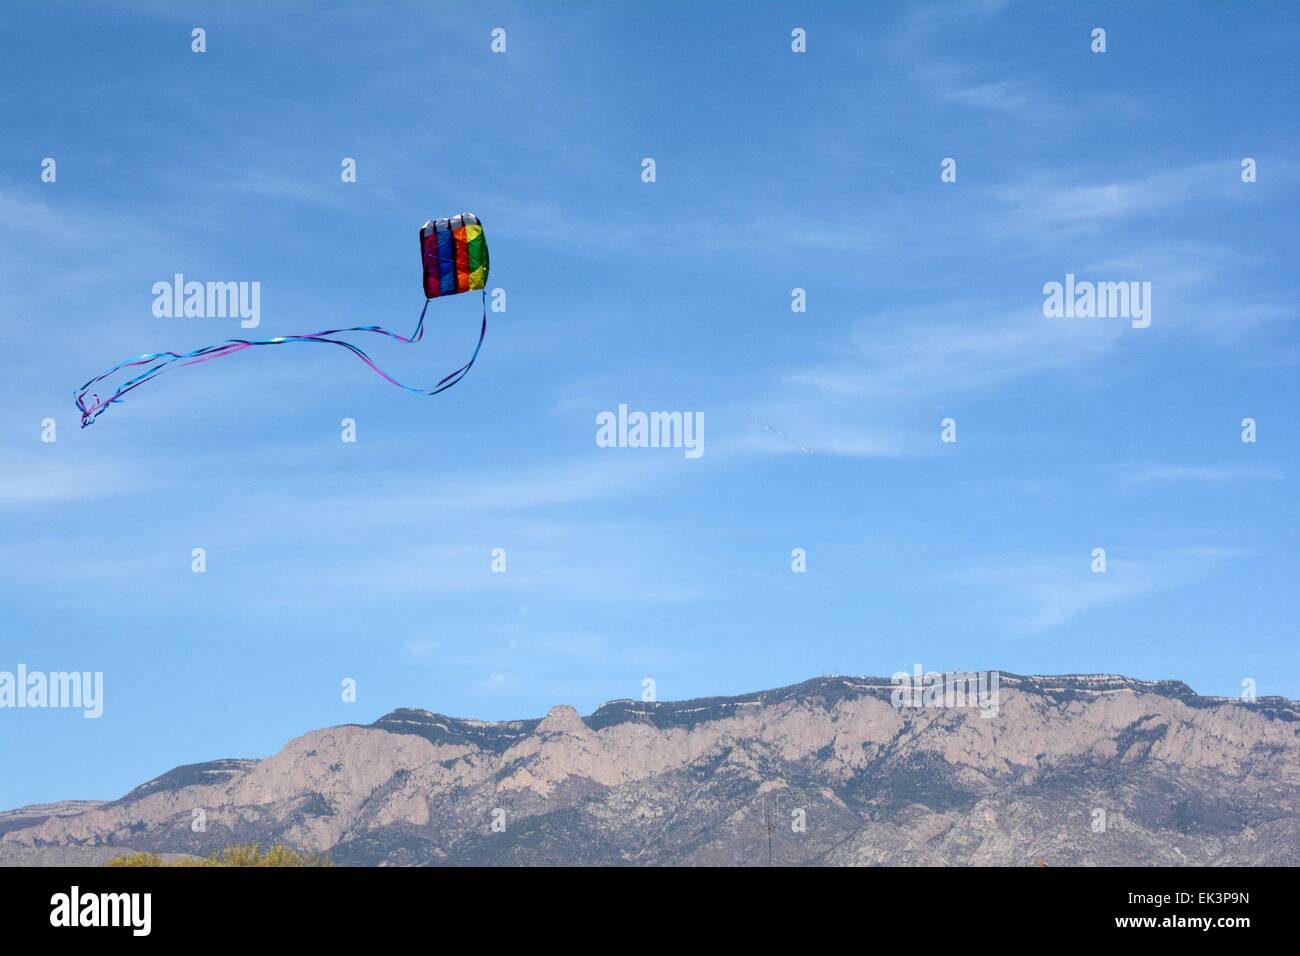 Kite with tails soaring in the wind, mountains in distance Albuquerque, New Mexico - USA Stock Photo